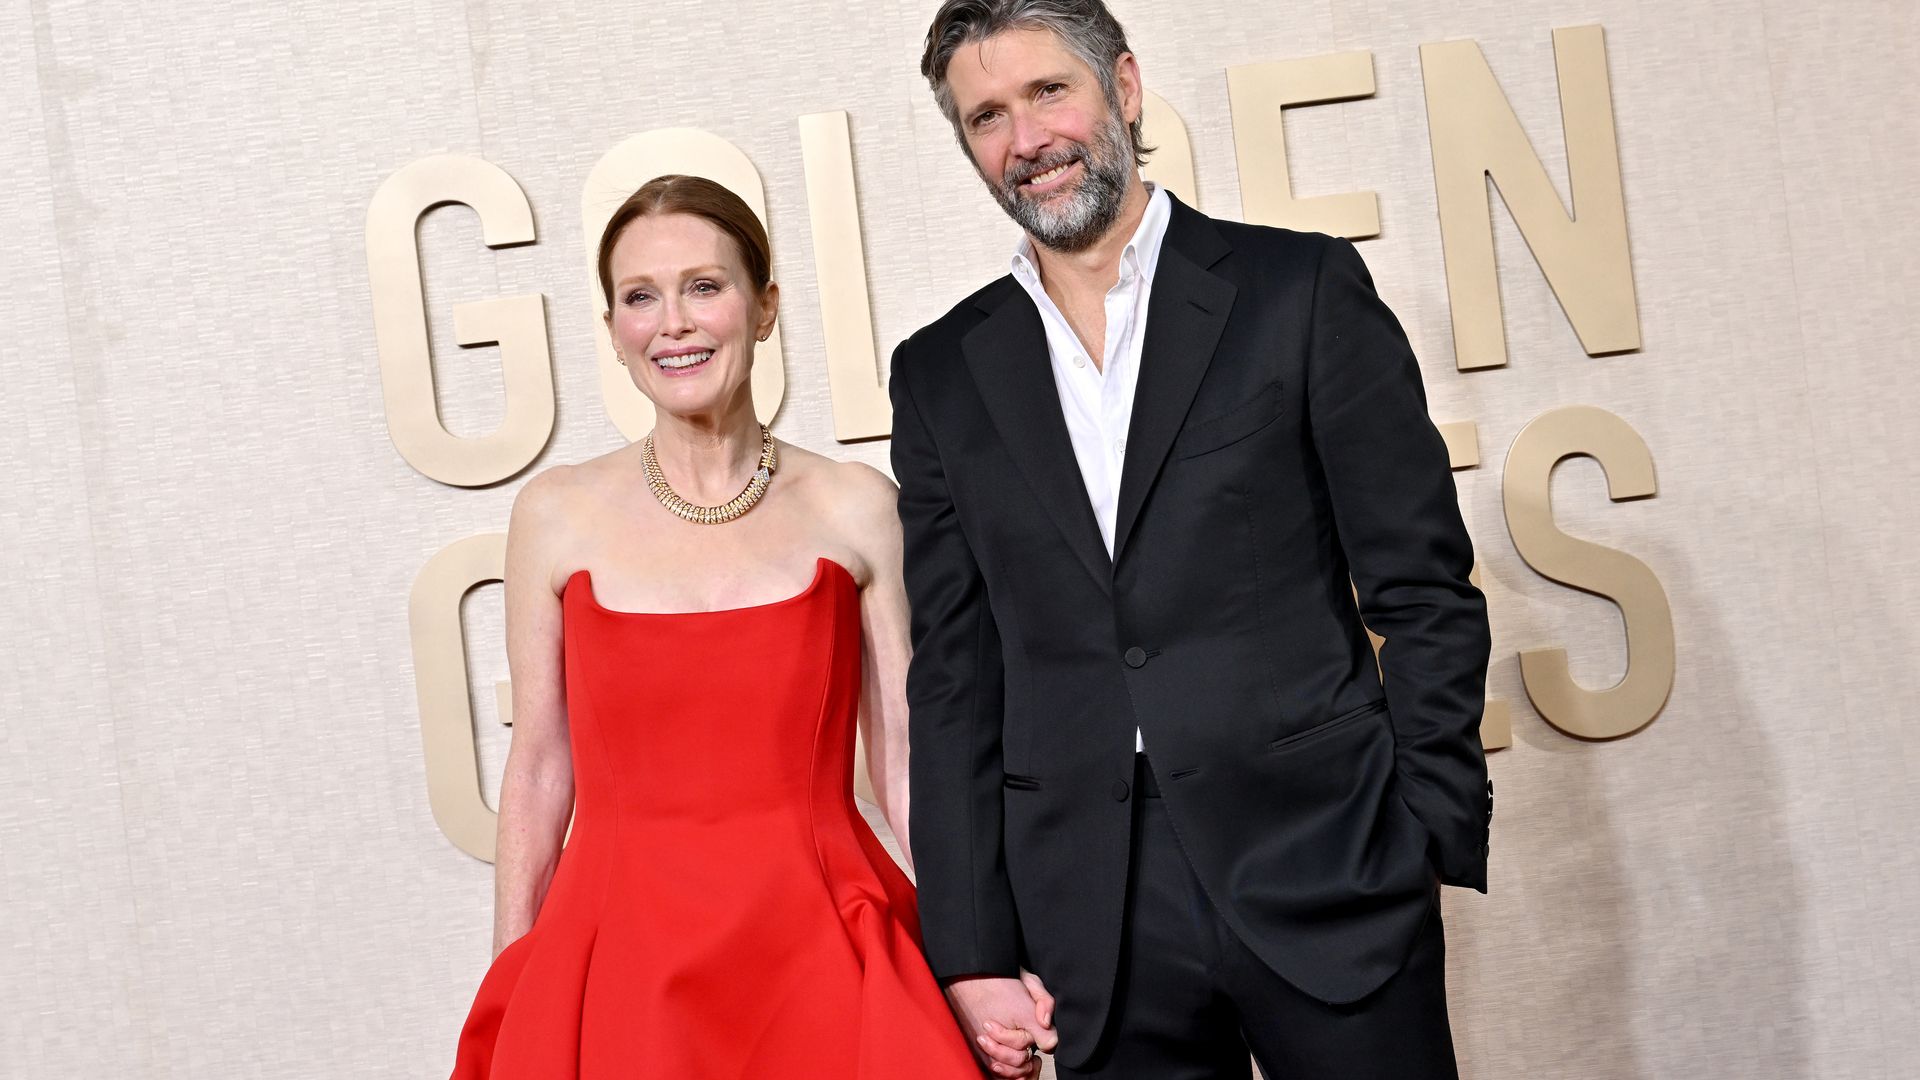 BEVERLY HILLS, CALIFORNIA - JANUARY 07: Julianne Moore and Bart Freundlich attend the 81st Annual Golden Globe Awards at The Beverly Hilton on January 07, 2024 in Beverly Hills, California. (Photo by Axelle/Bauer-Griffin/FilmMagic)